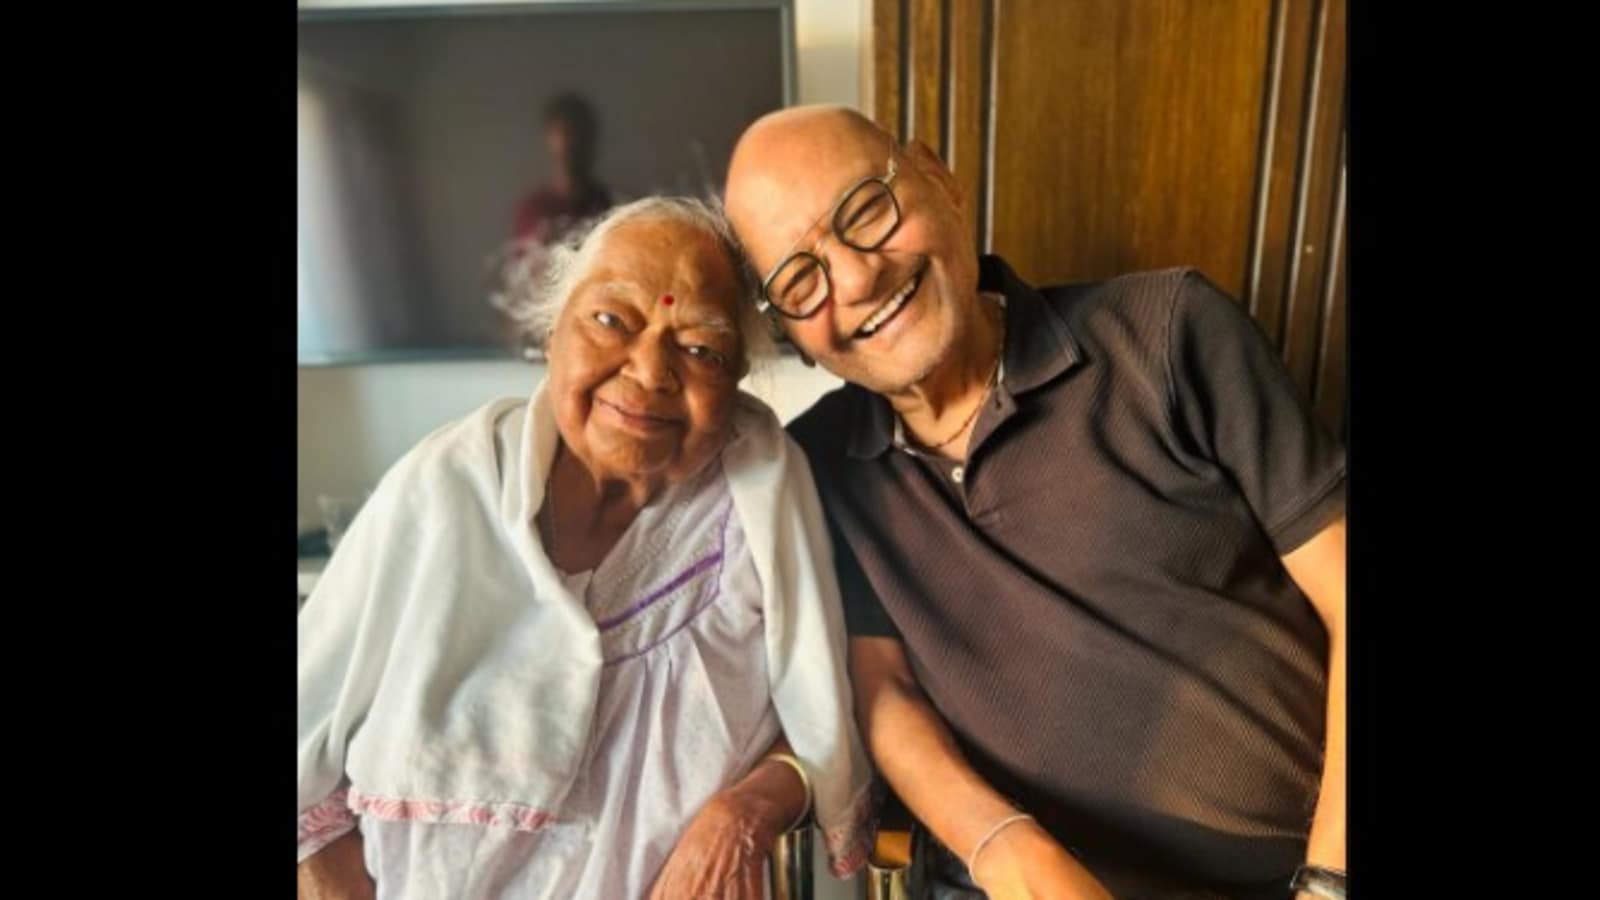 Vendanta founder Anil Agarwal on how his mom inspired him to start the company: ‘I nearly gave up’